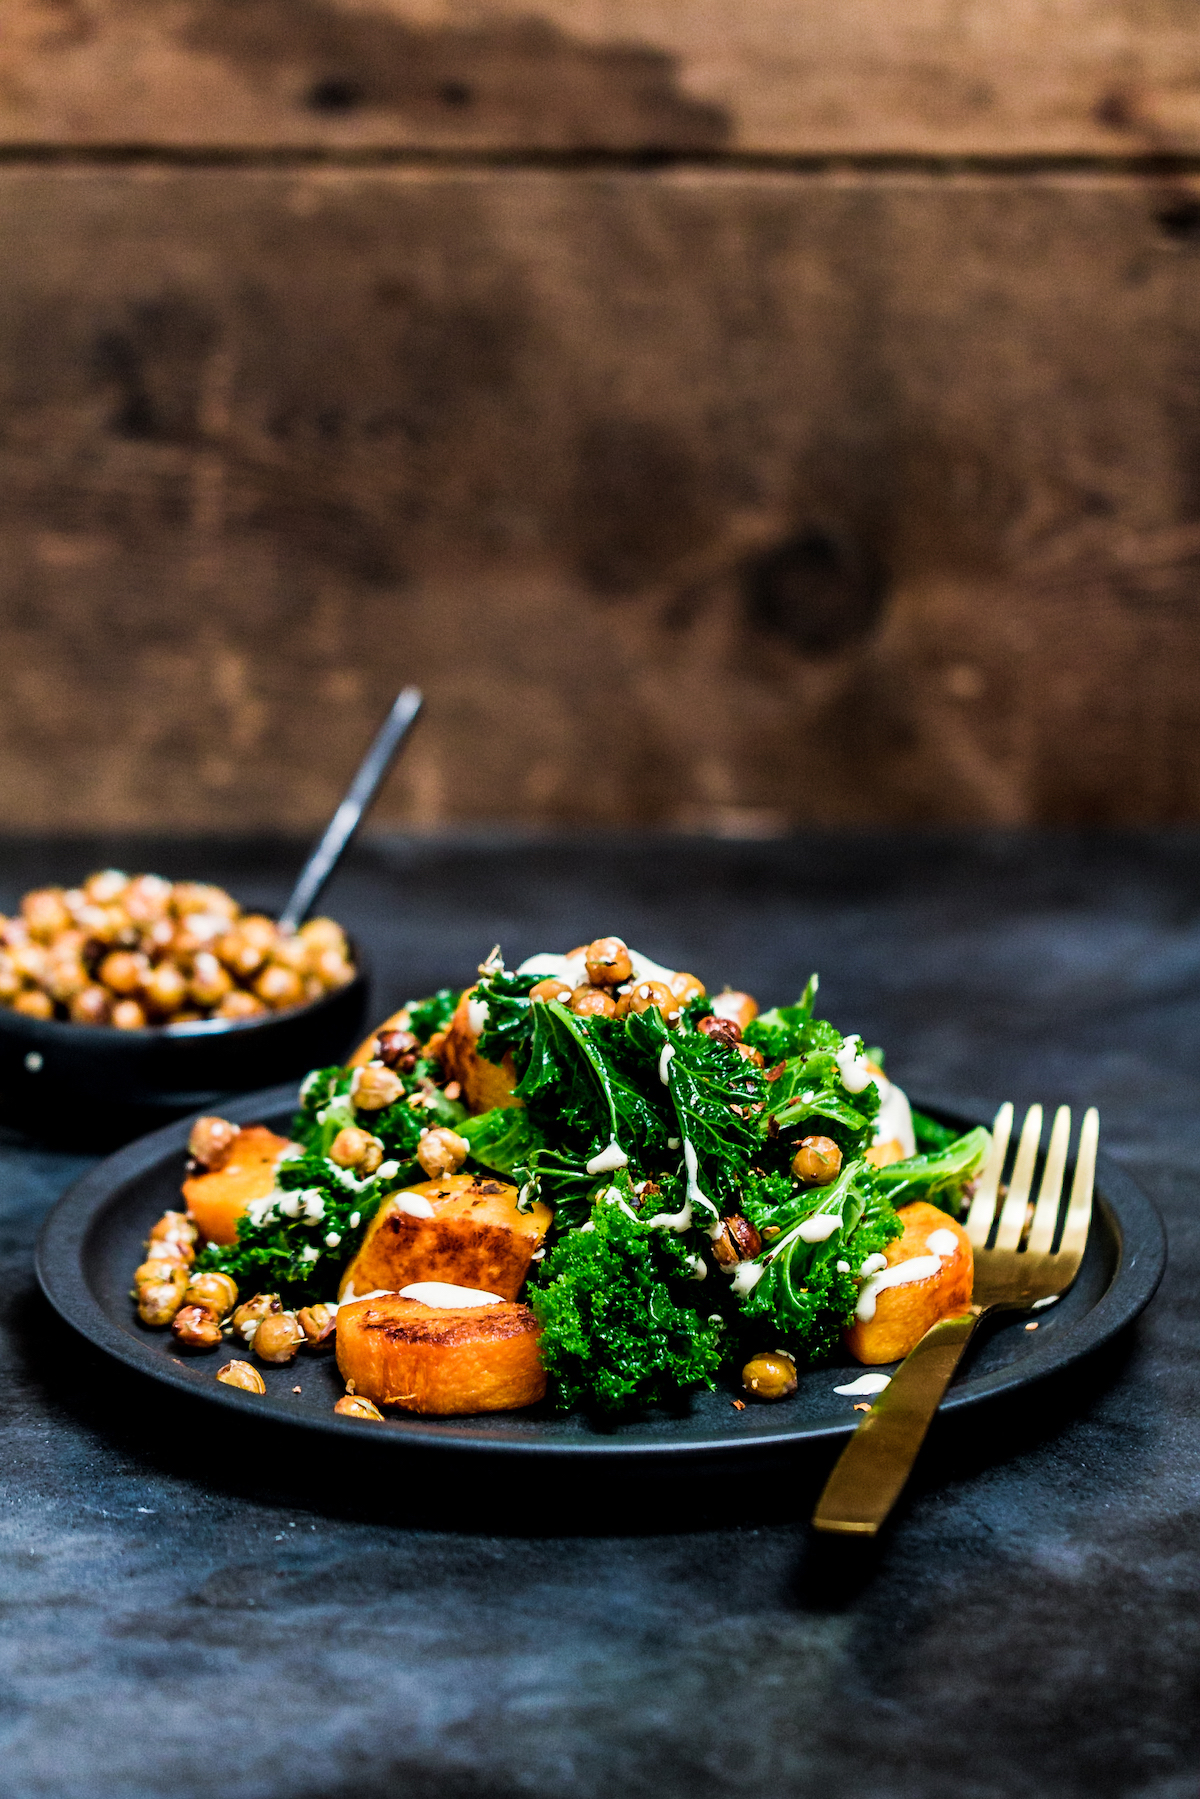 Baked butternut squash cubes with steamed kale, crispy chickpeas and tahini sauce on a black plate